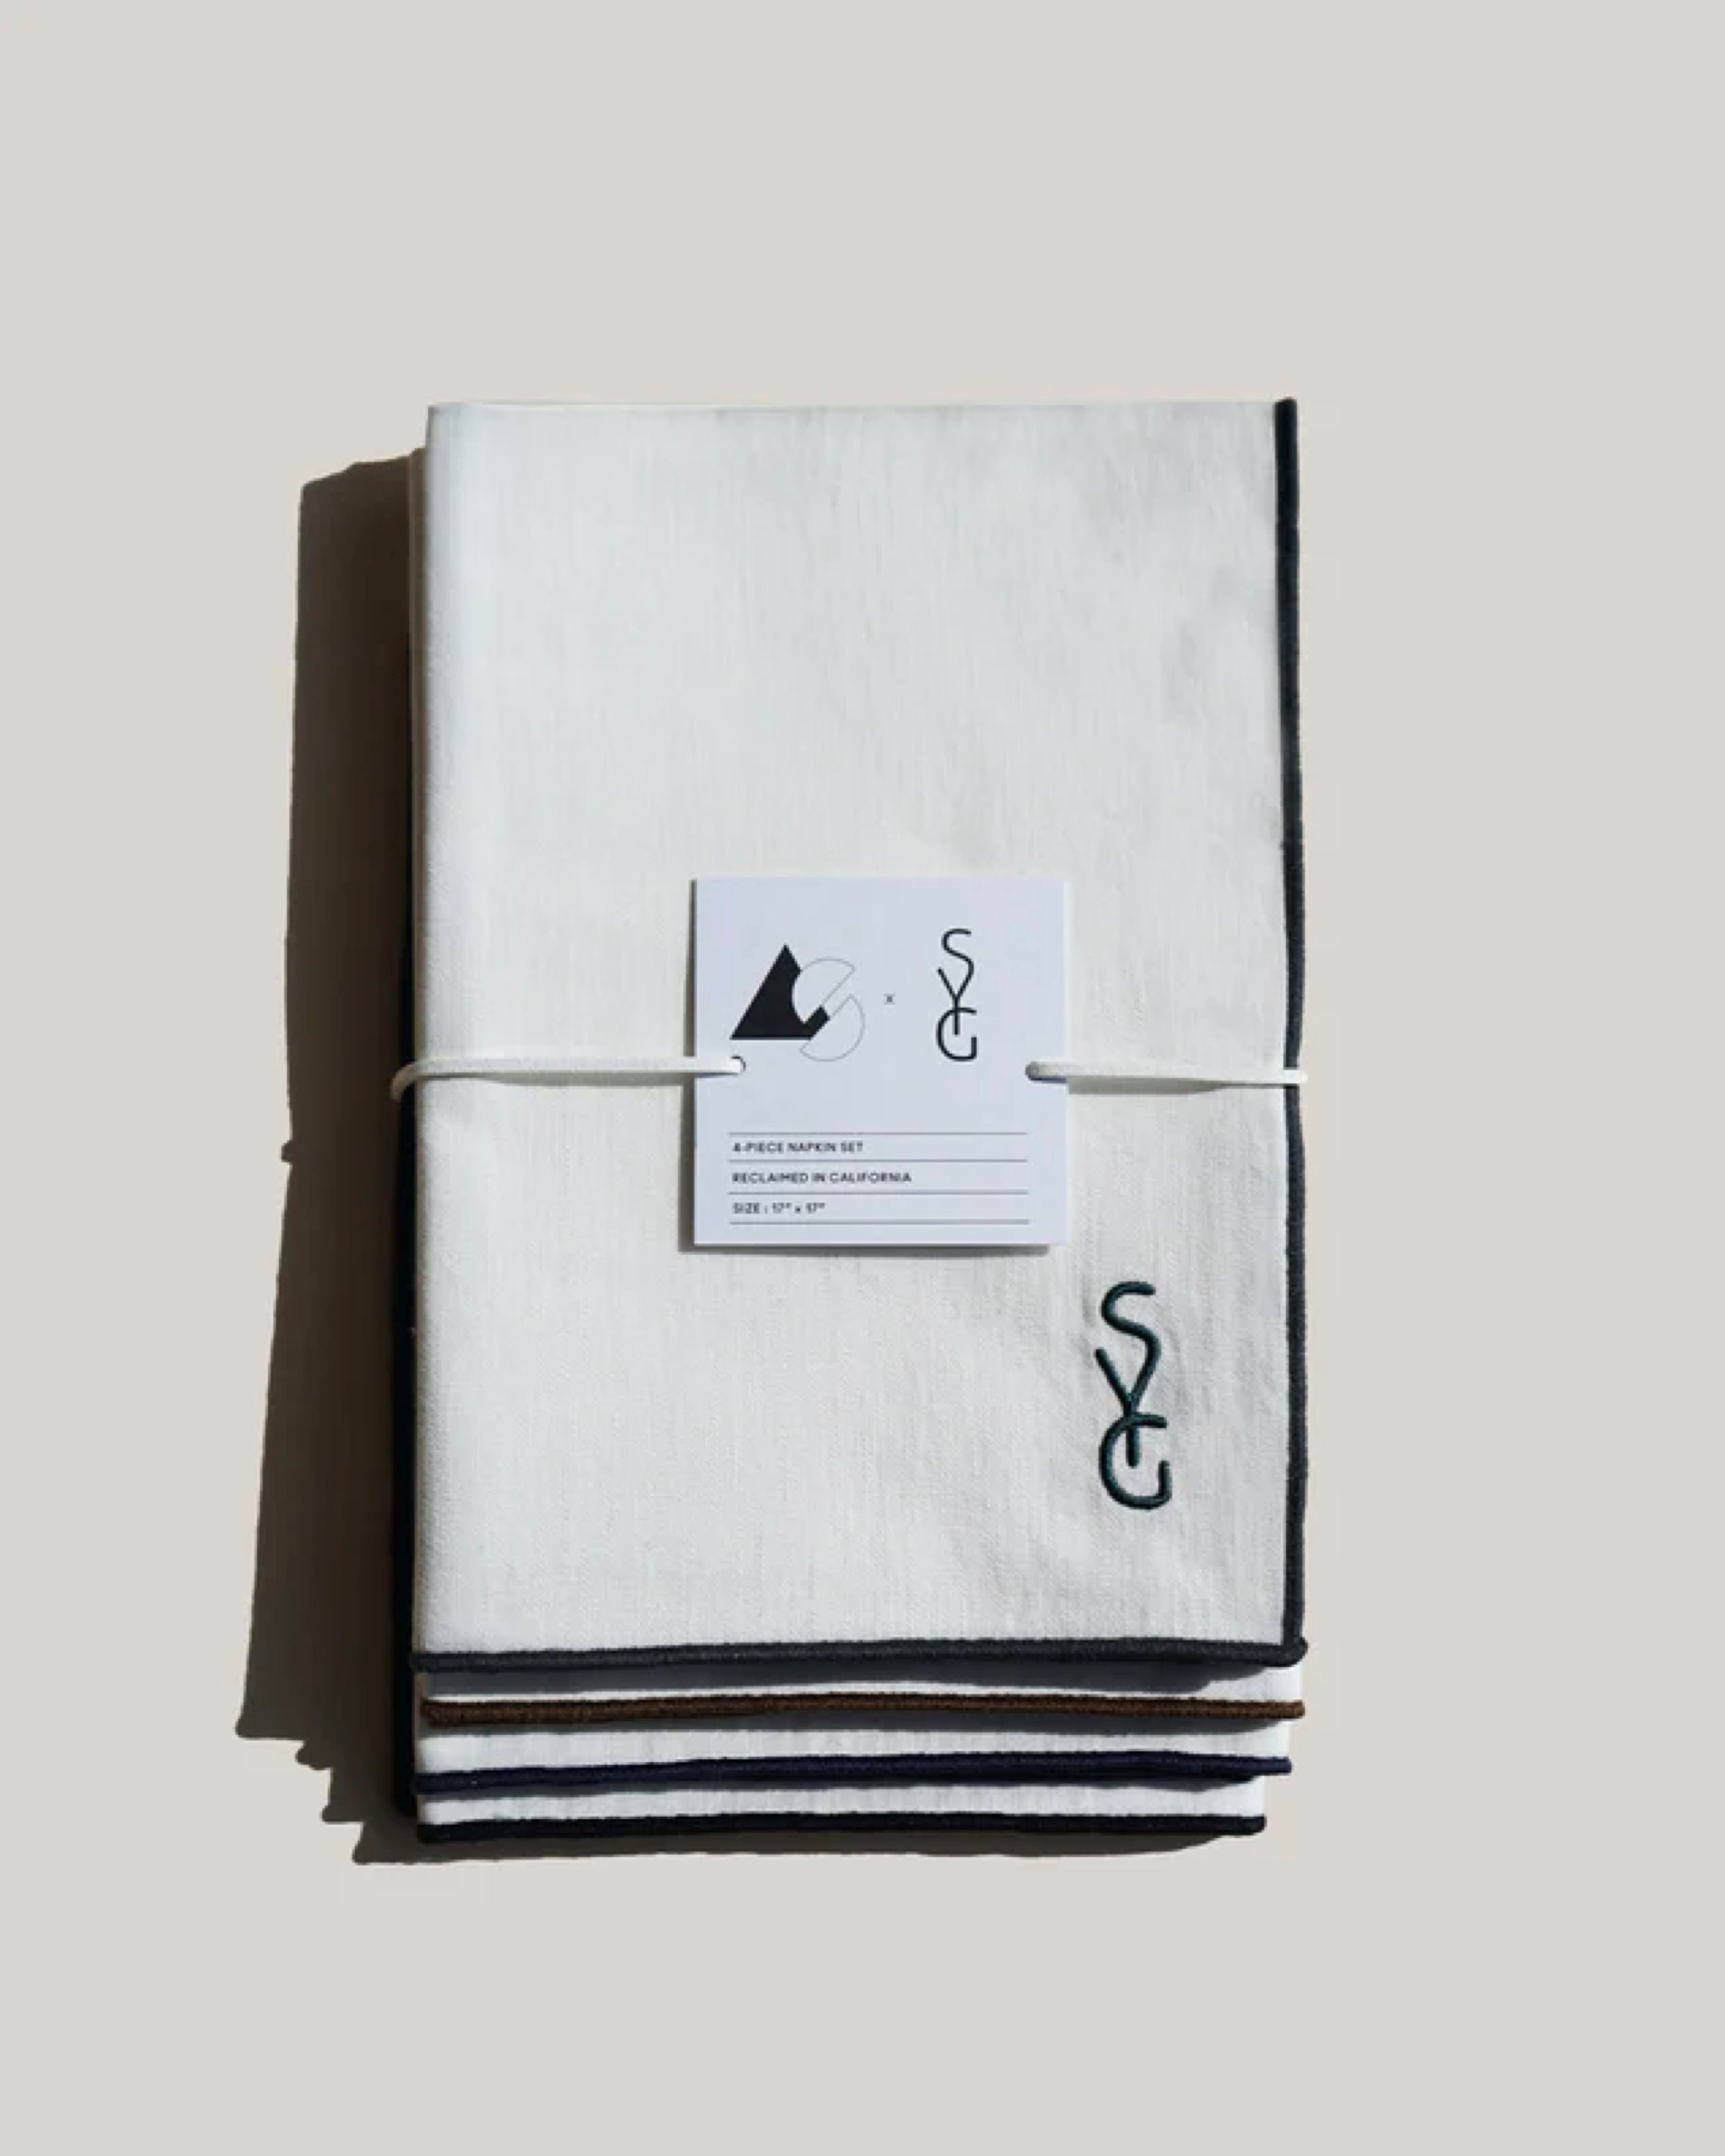 AS X SYG VALLEY MIX TWILL NAPKINS